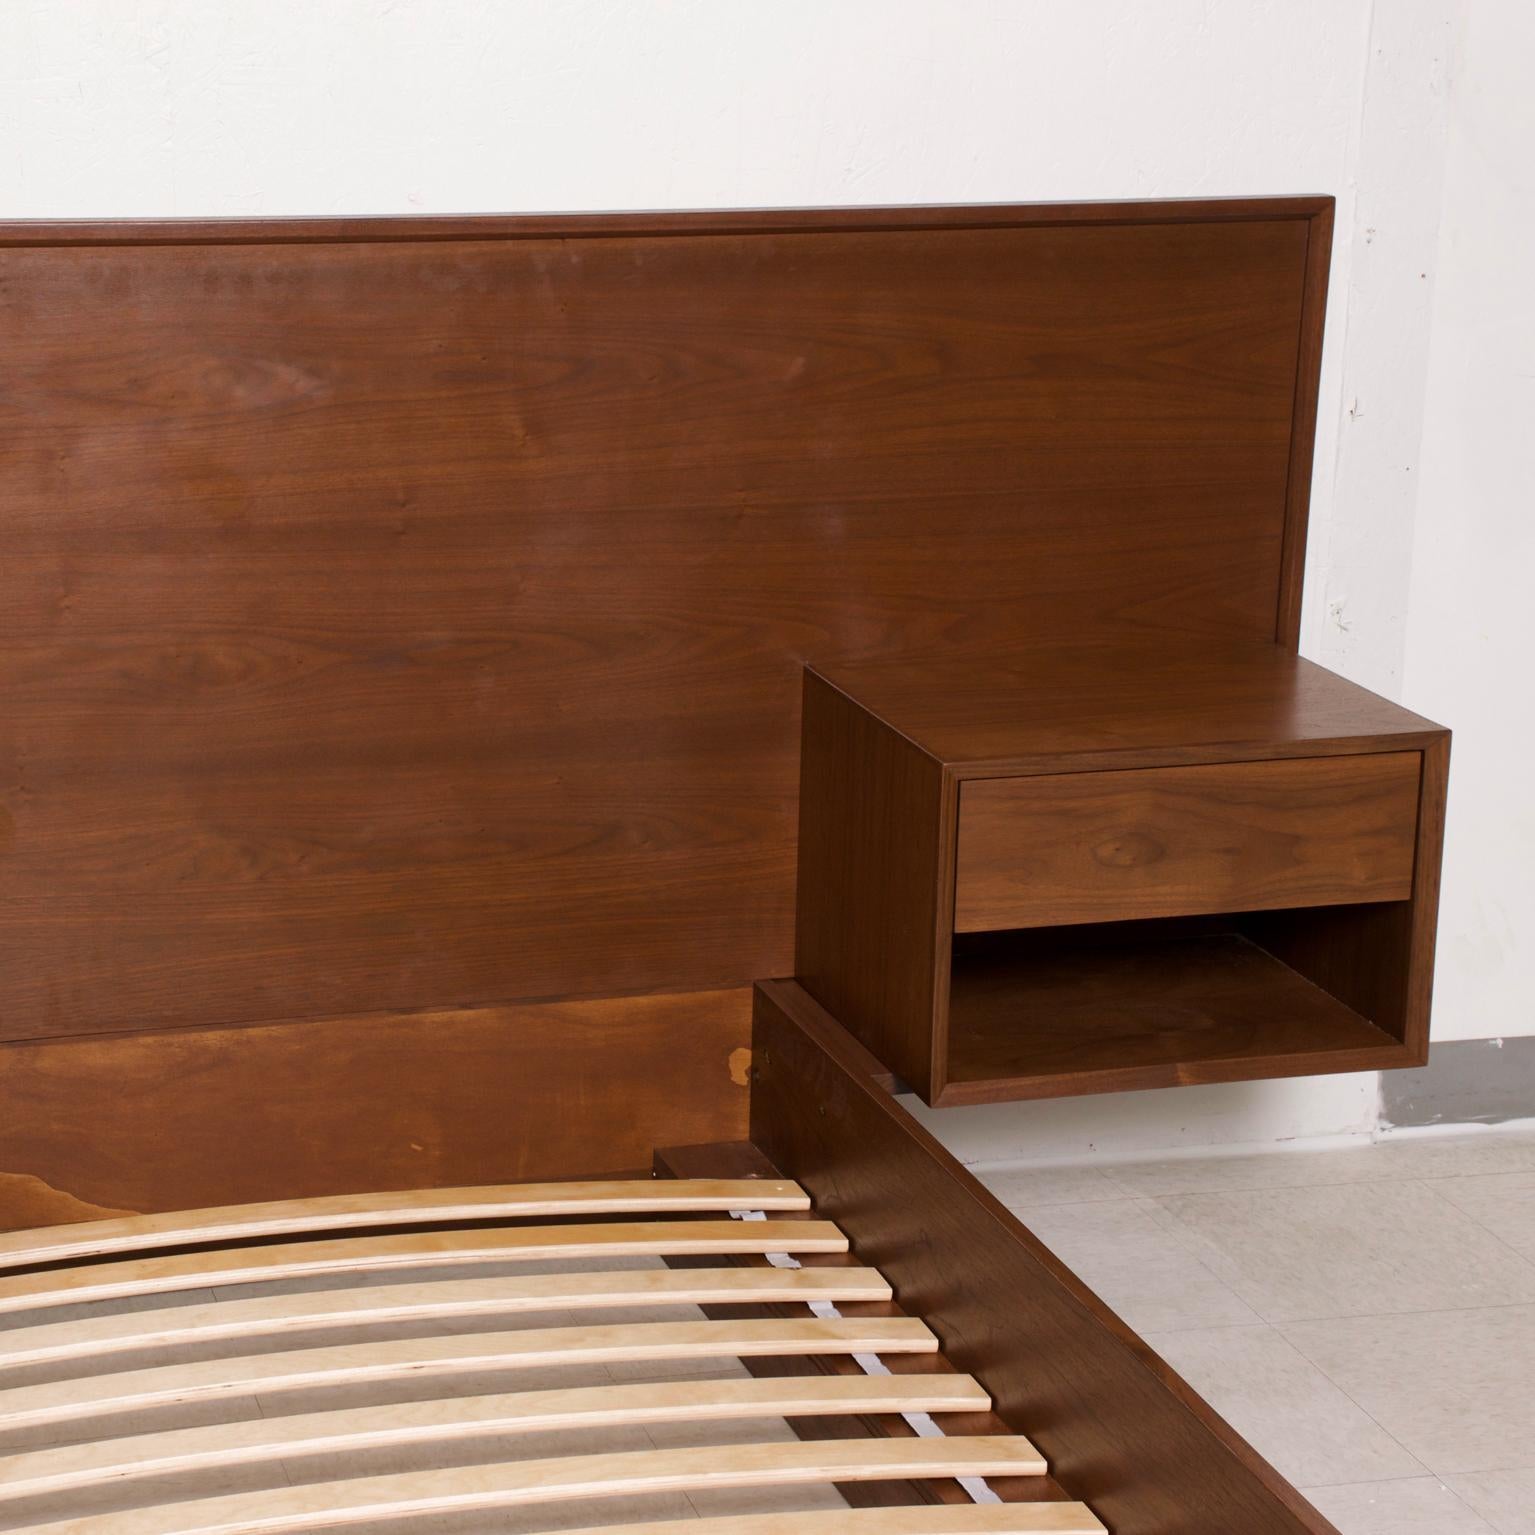 American Modern King Size Platform Bed with Floating Nightstands in Walnut